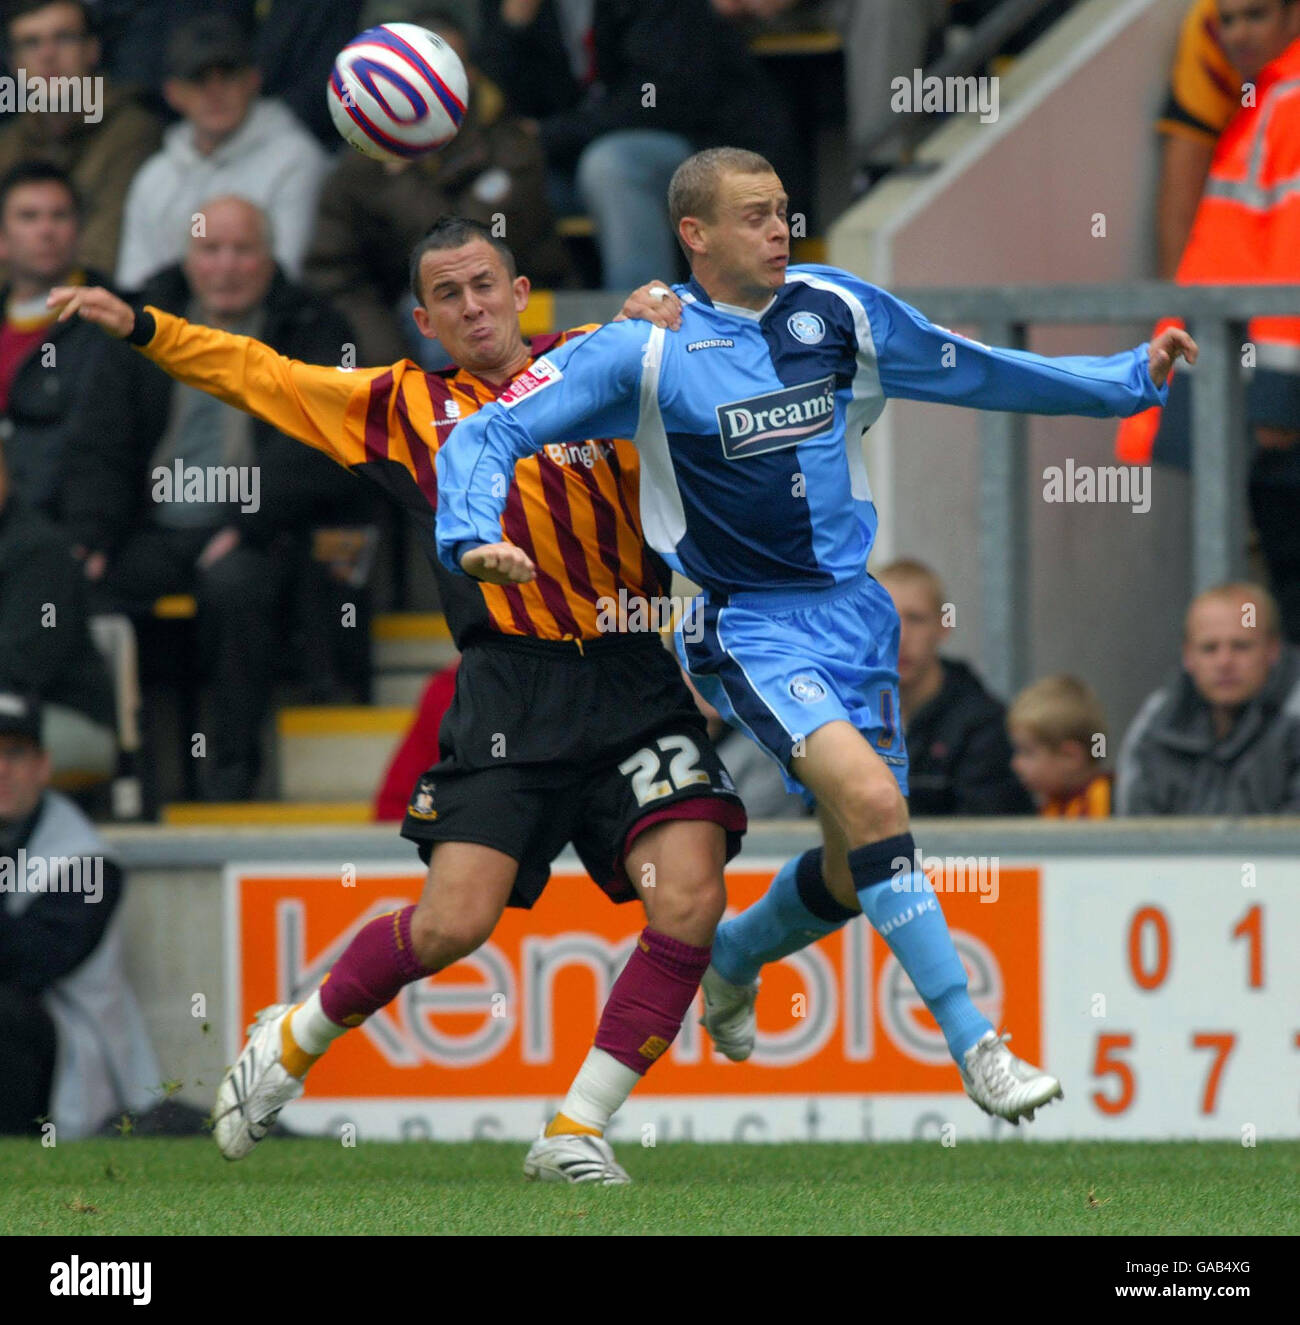 Bradford's Kyle Nix and Wycombe's Martin Bullock battle for the ball during the Coca-Cola Football League Two match at Valley Parade Stadium, Bradford. Stock Photo